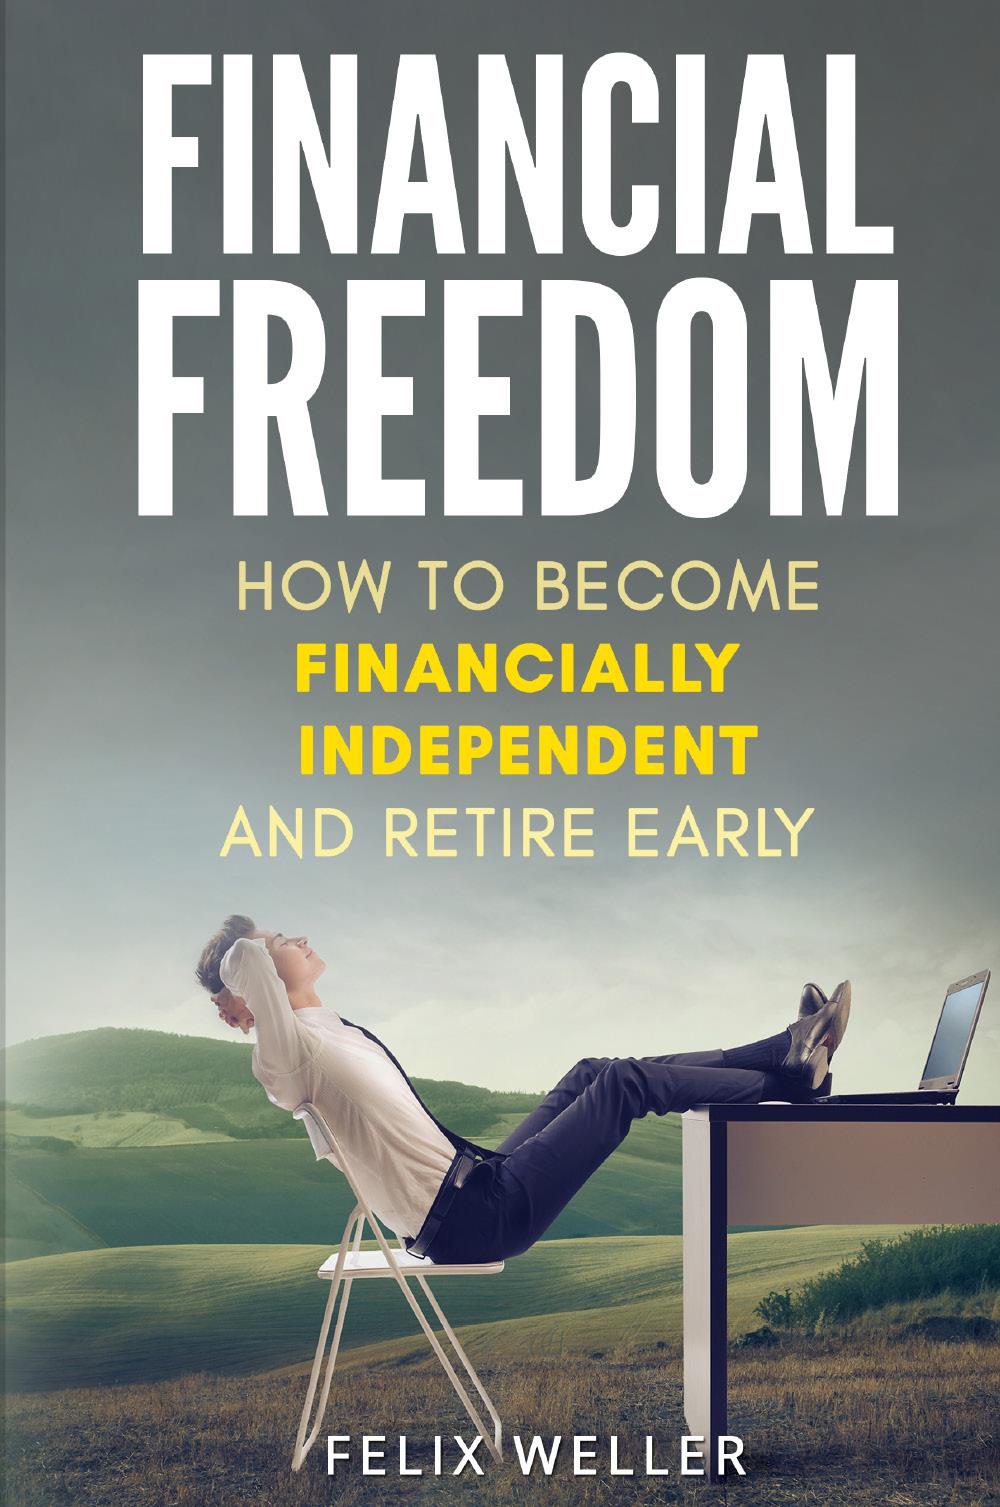 Financial Freedom. How To Become Financially Independent and Retire Early